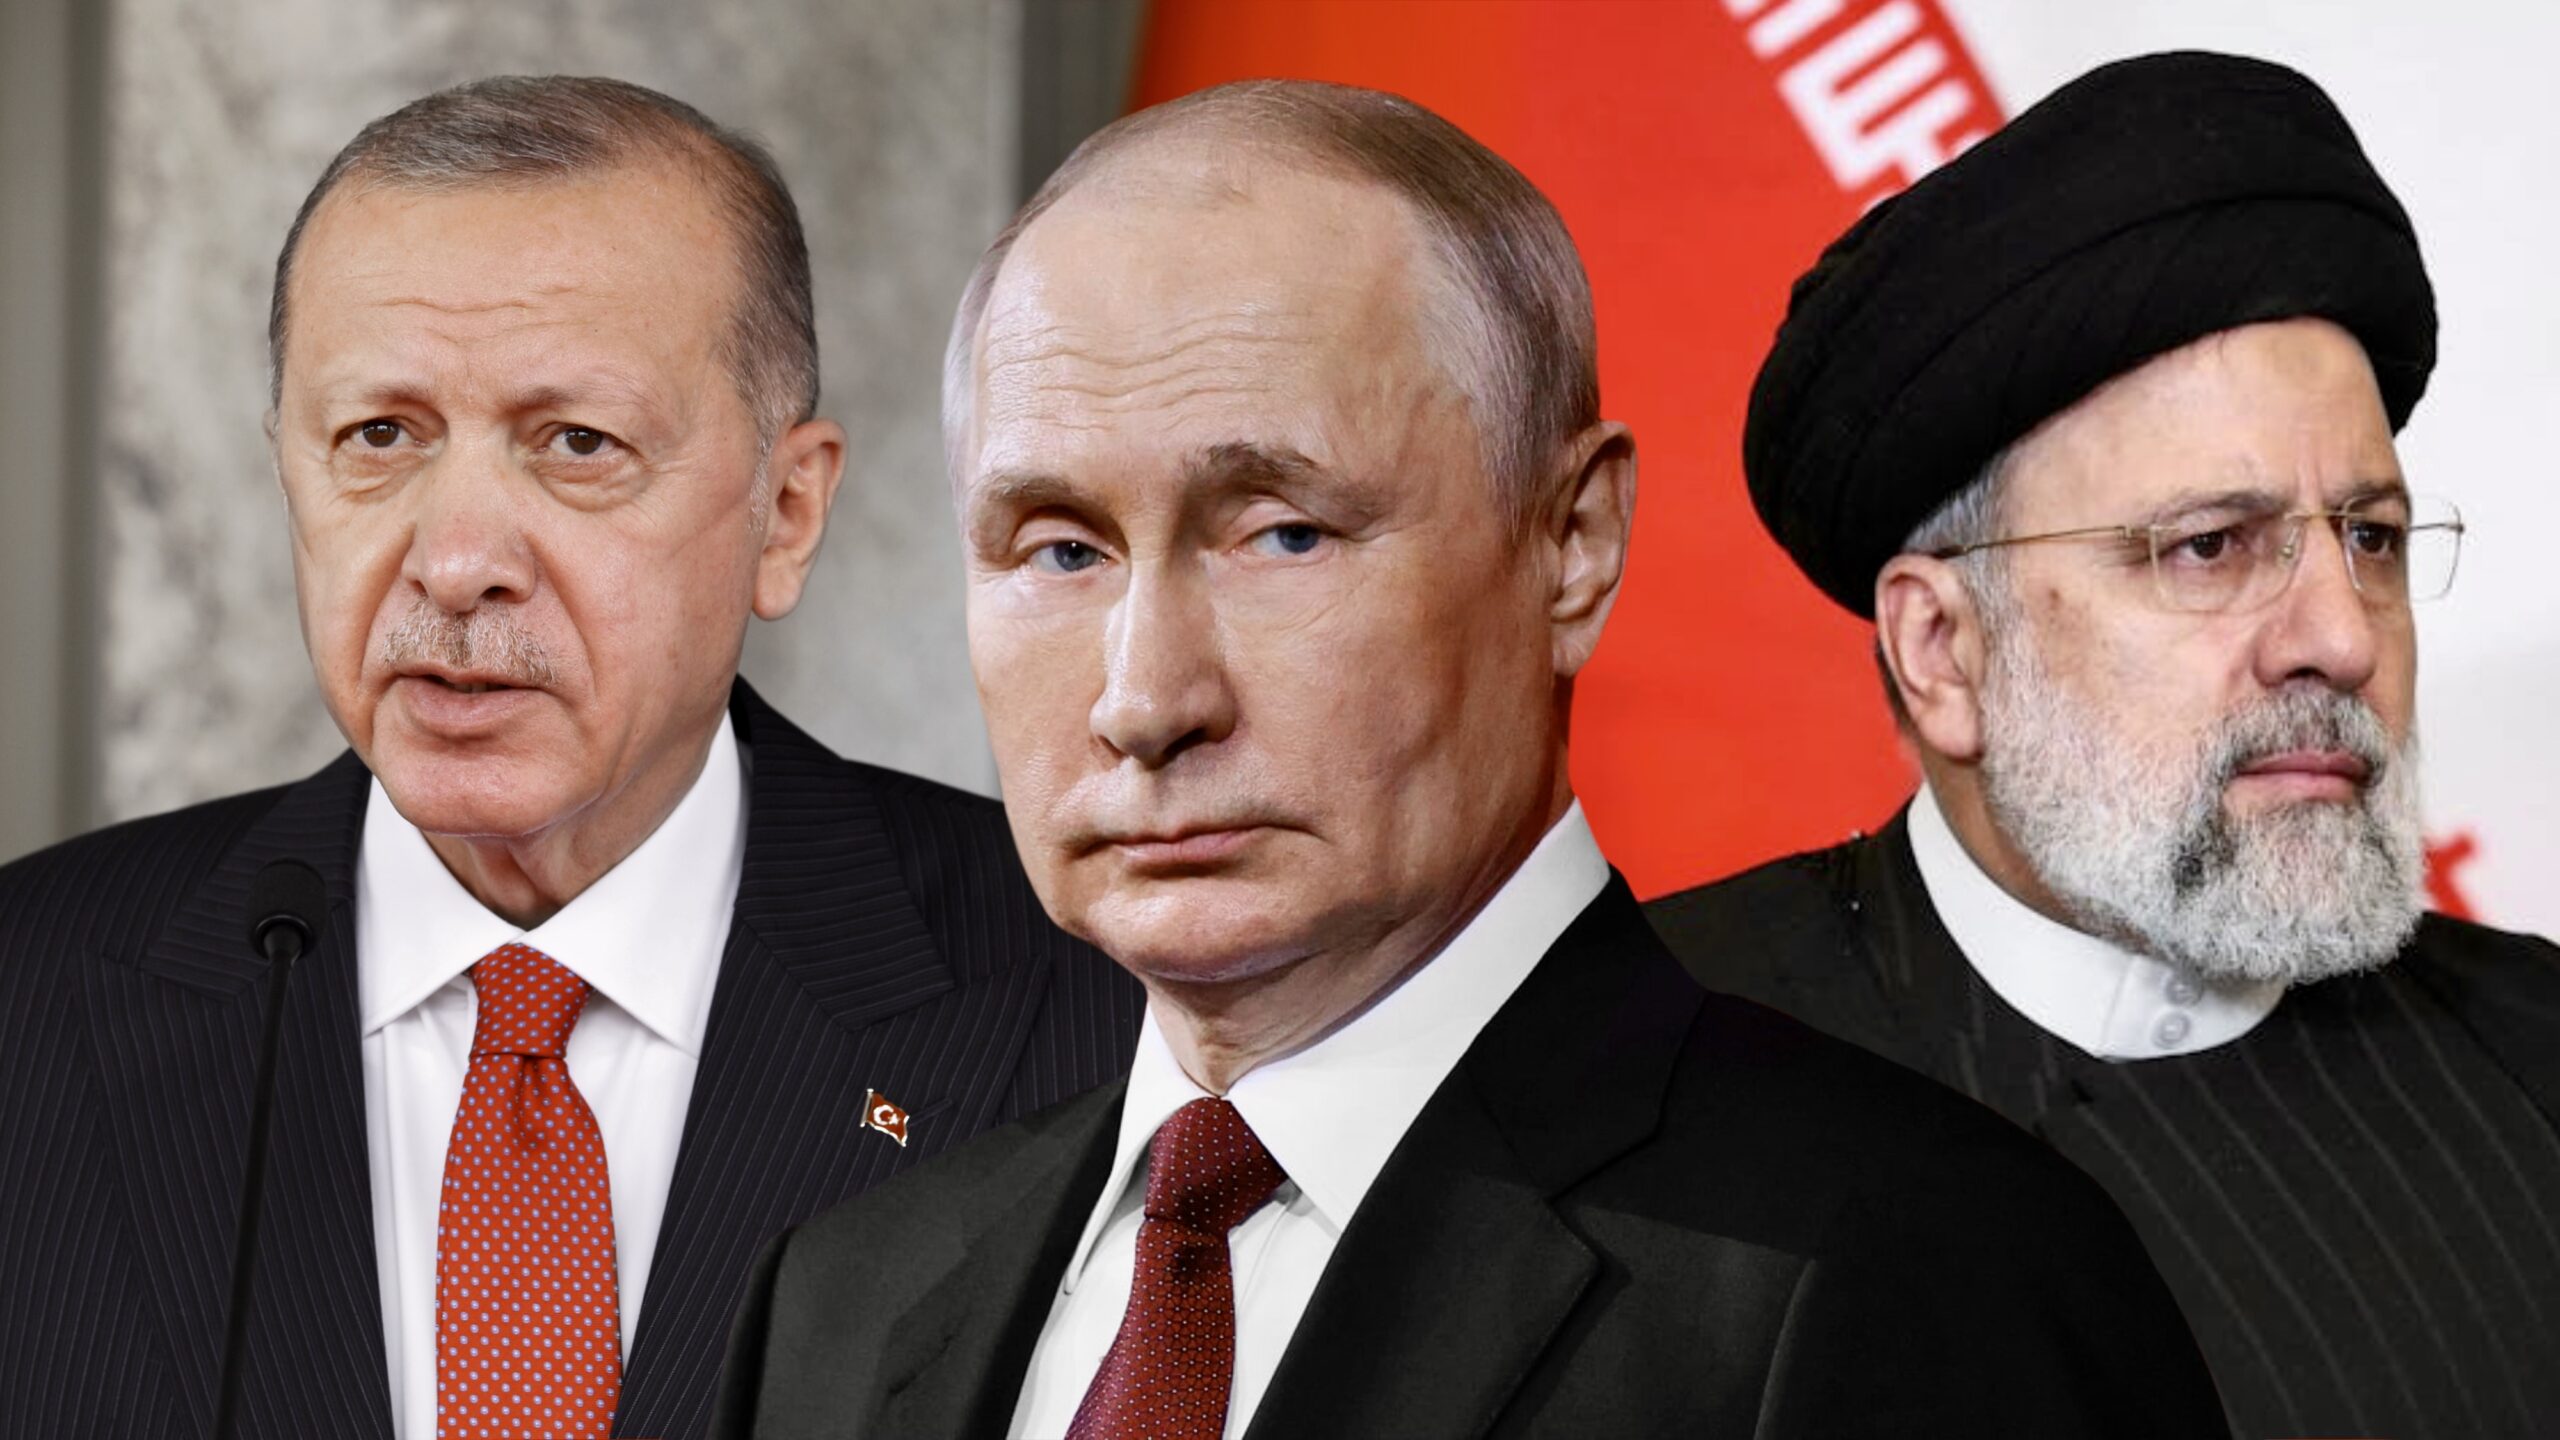 Why Students Of God’s Word Aren’t Surprised By Russia, Iran, And Turkey’s Mutal Hatred Of Israel - Harbingers Daily